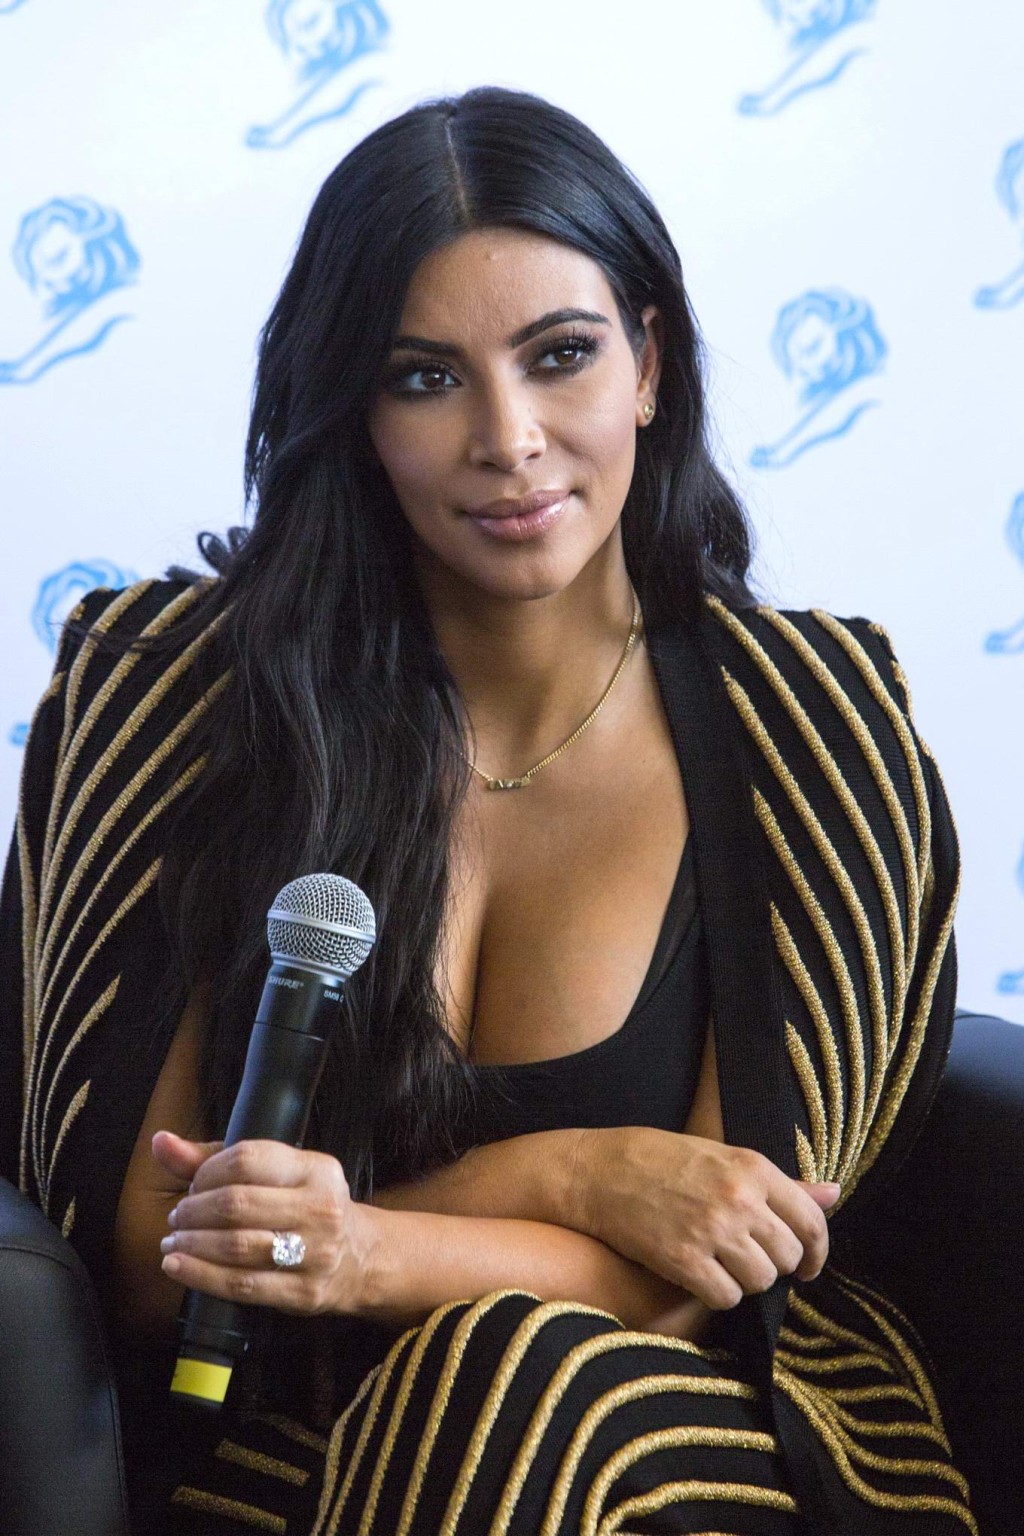 Kim Kardashian Showing Huge Cleavage At The Cannes Lions Event